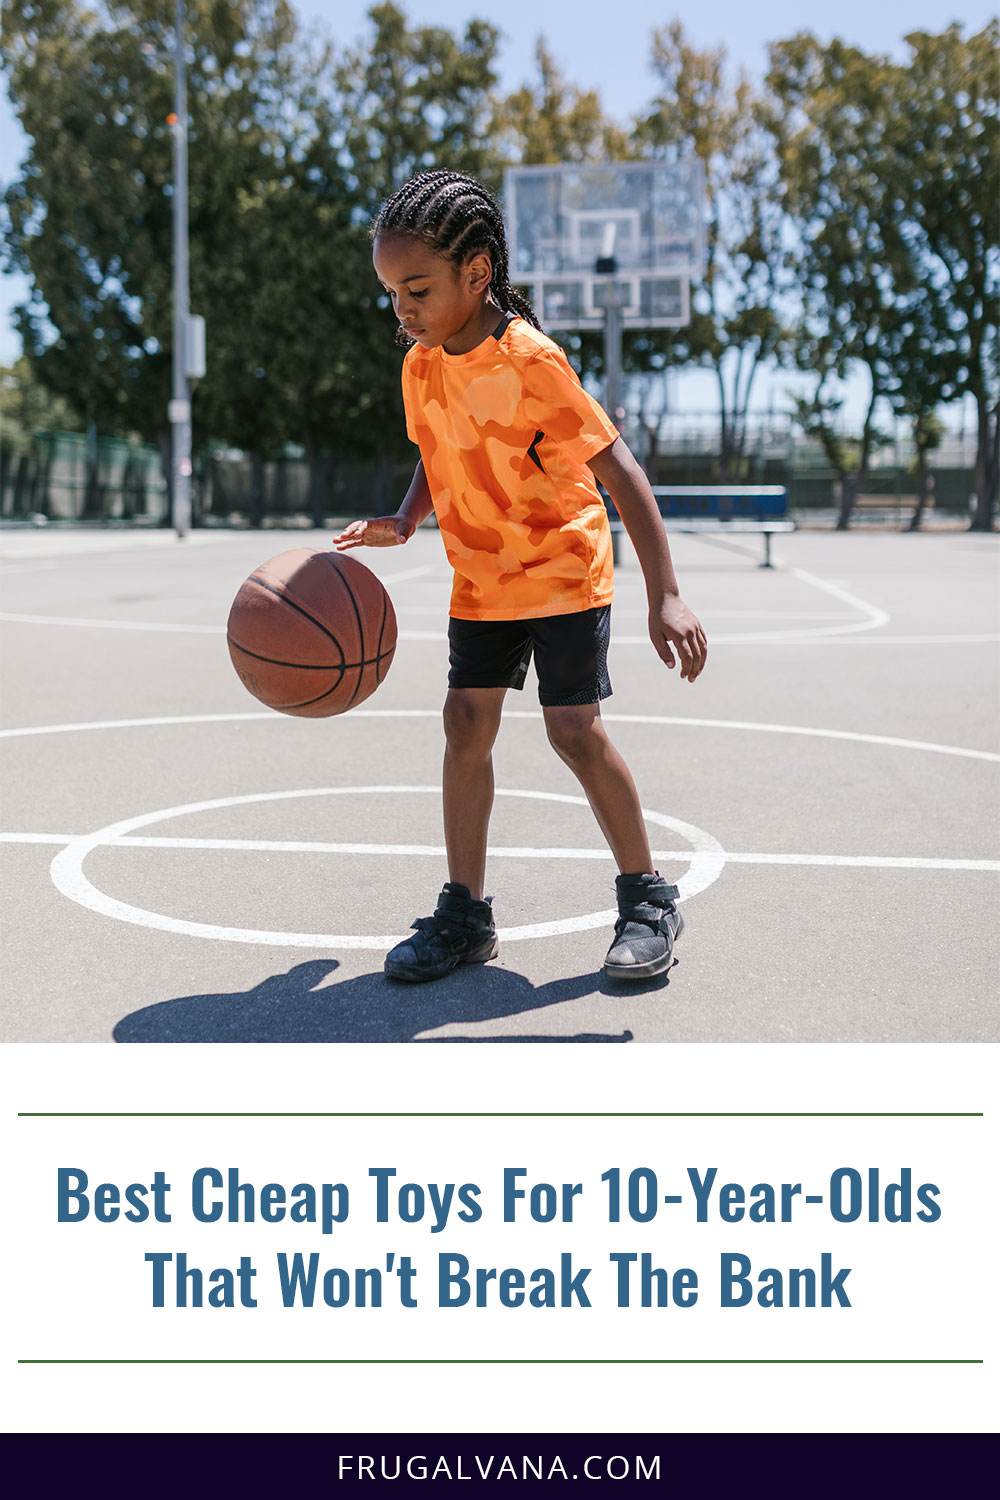 Best Cheap Toys For 10-Year-Olds That Won’t Break The Bank